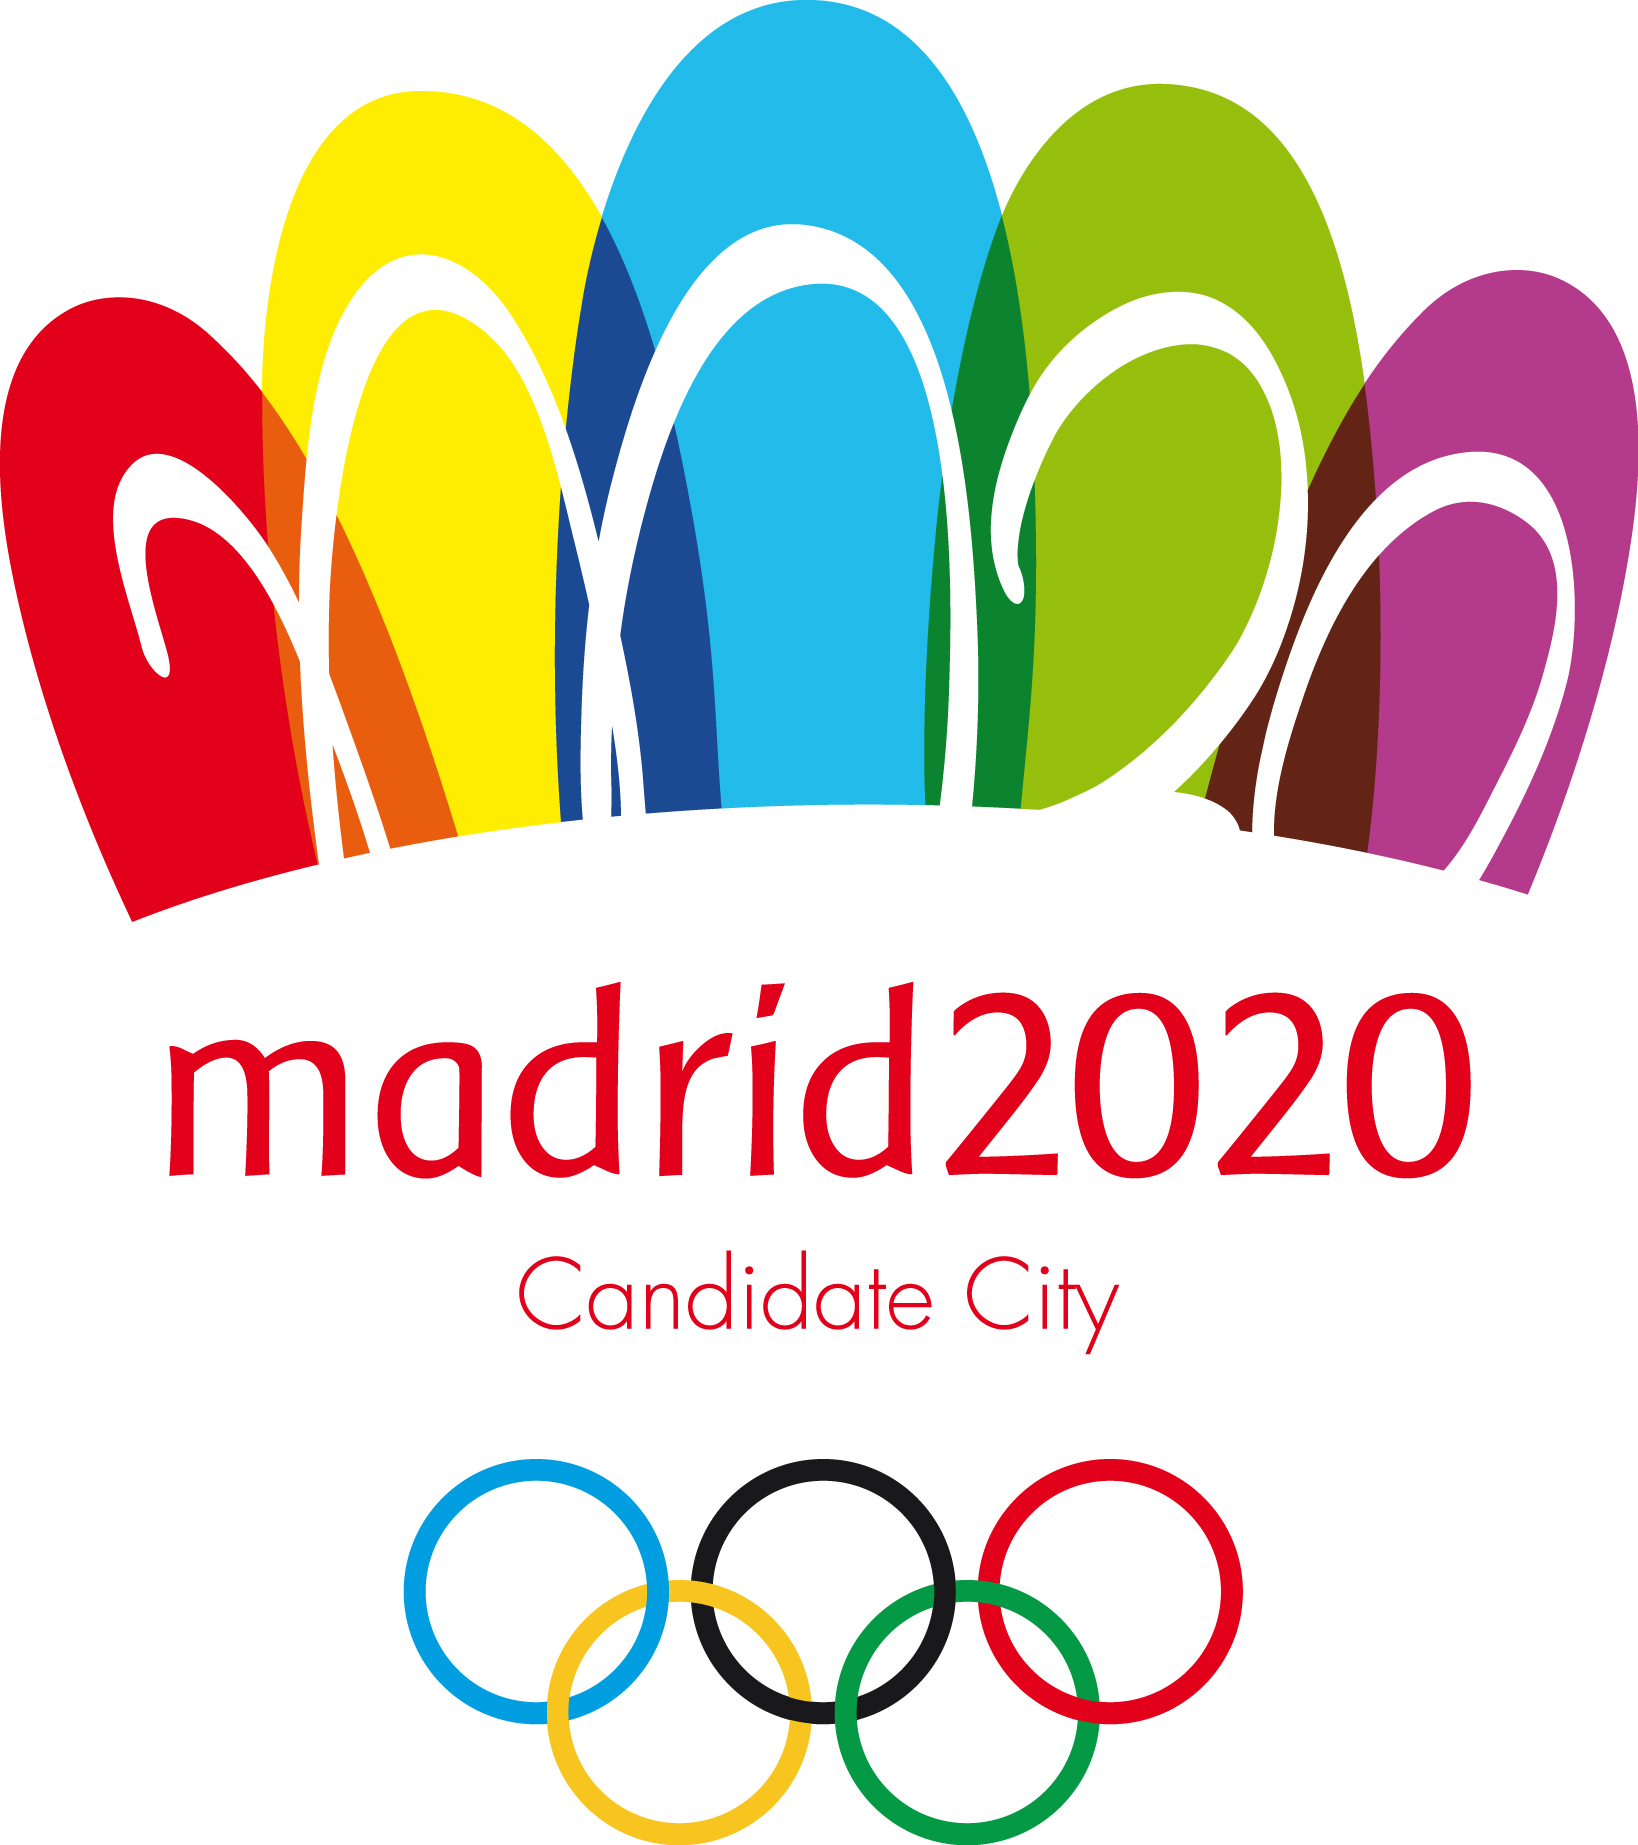 Madrd 2020_updated_logo